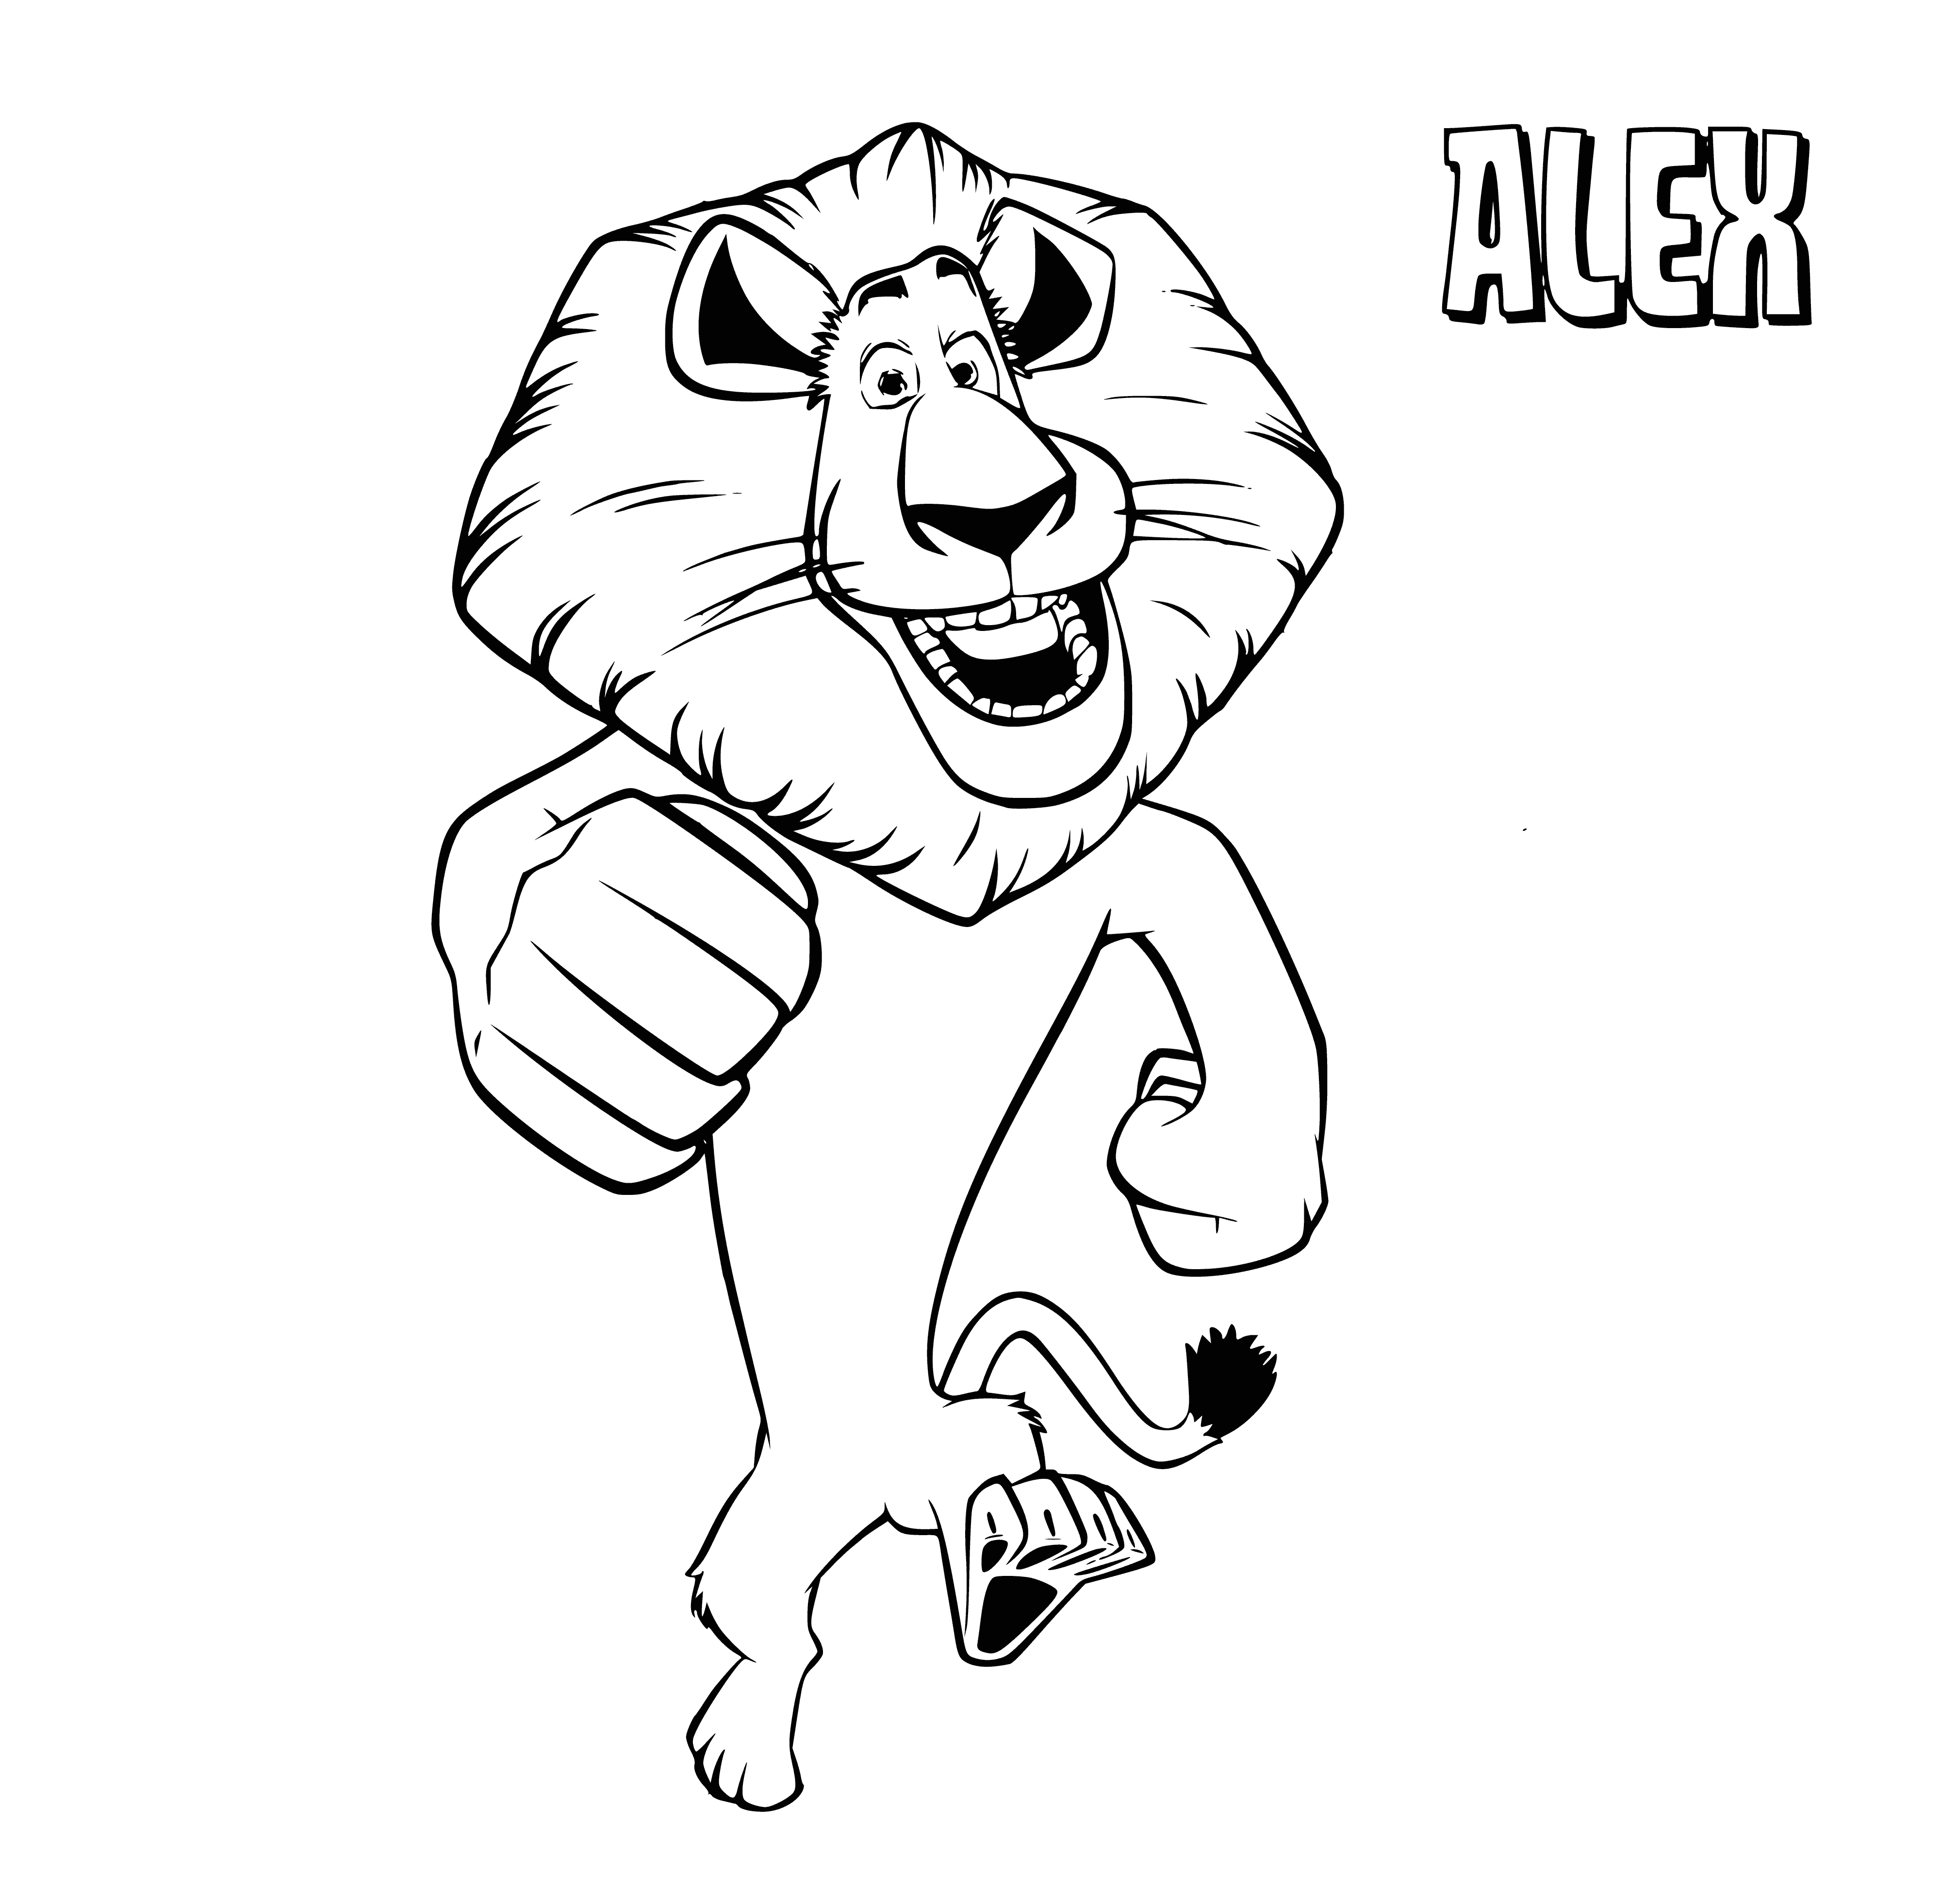 coloring page: Leo Alex is a friendly lemur from Madagascar with an orange coat and black spots, who loves to play.